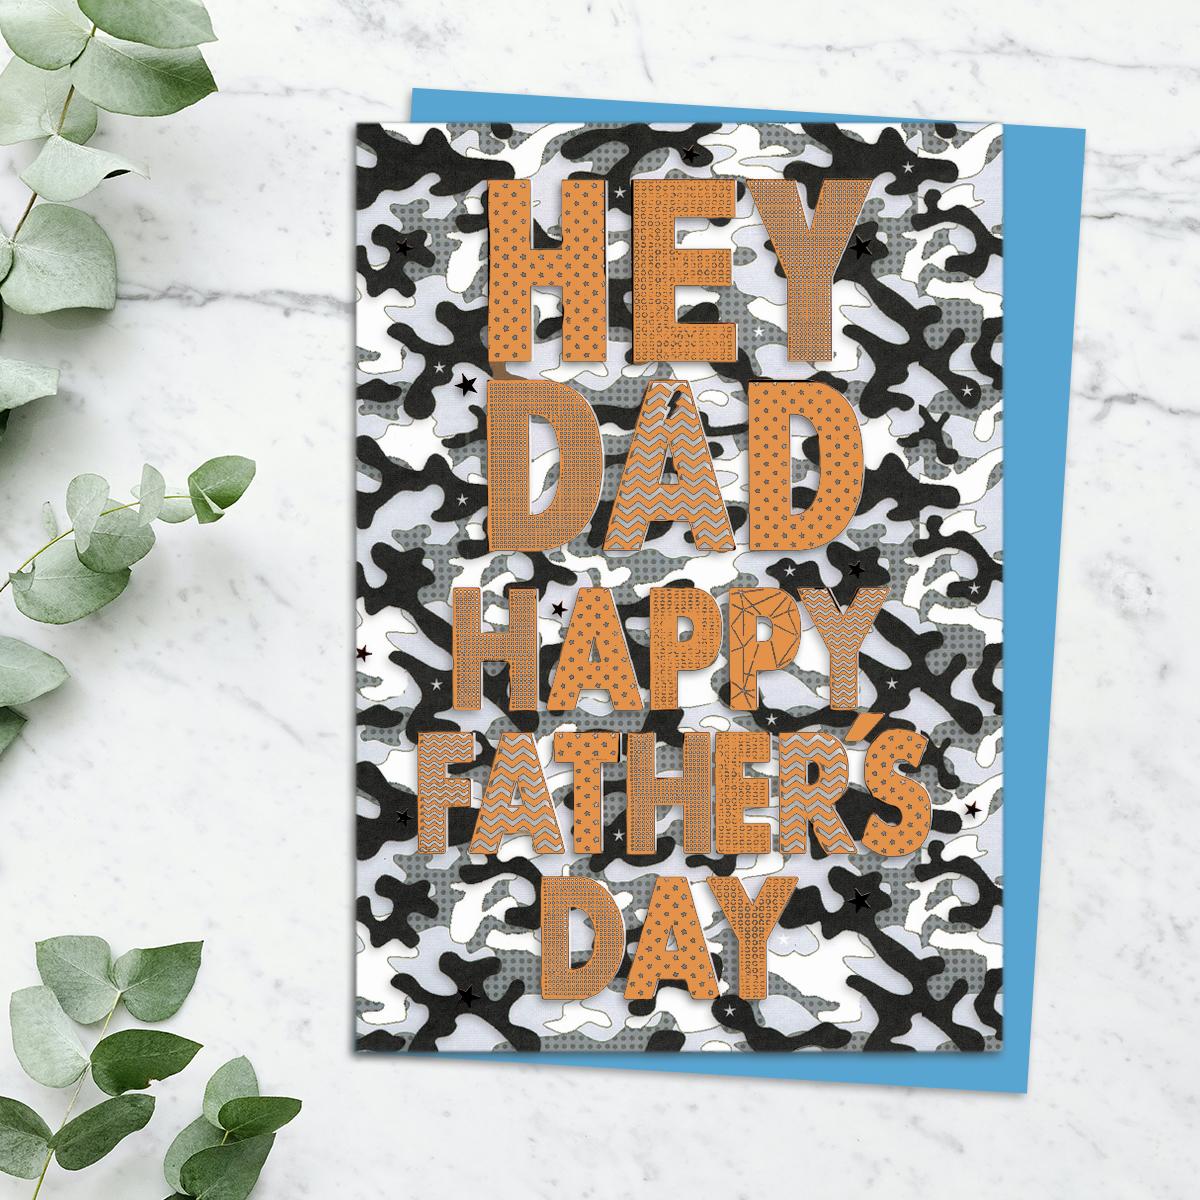 'Hey Dad Happy Father's Day' Card With Black And White Camouflage Background And Copper Foiled Text. Complete With Blue Envelope